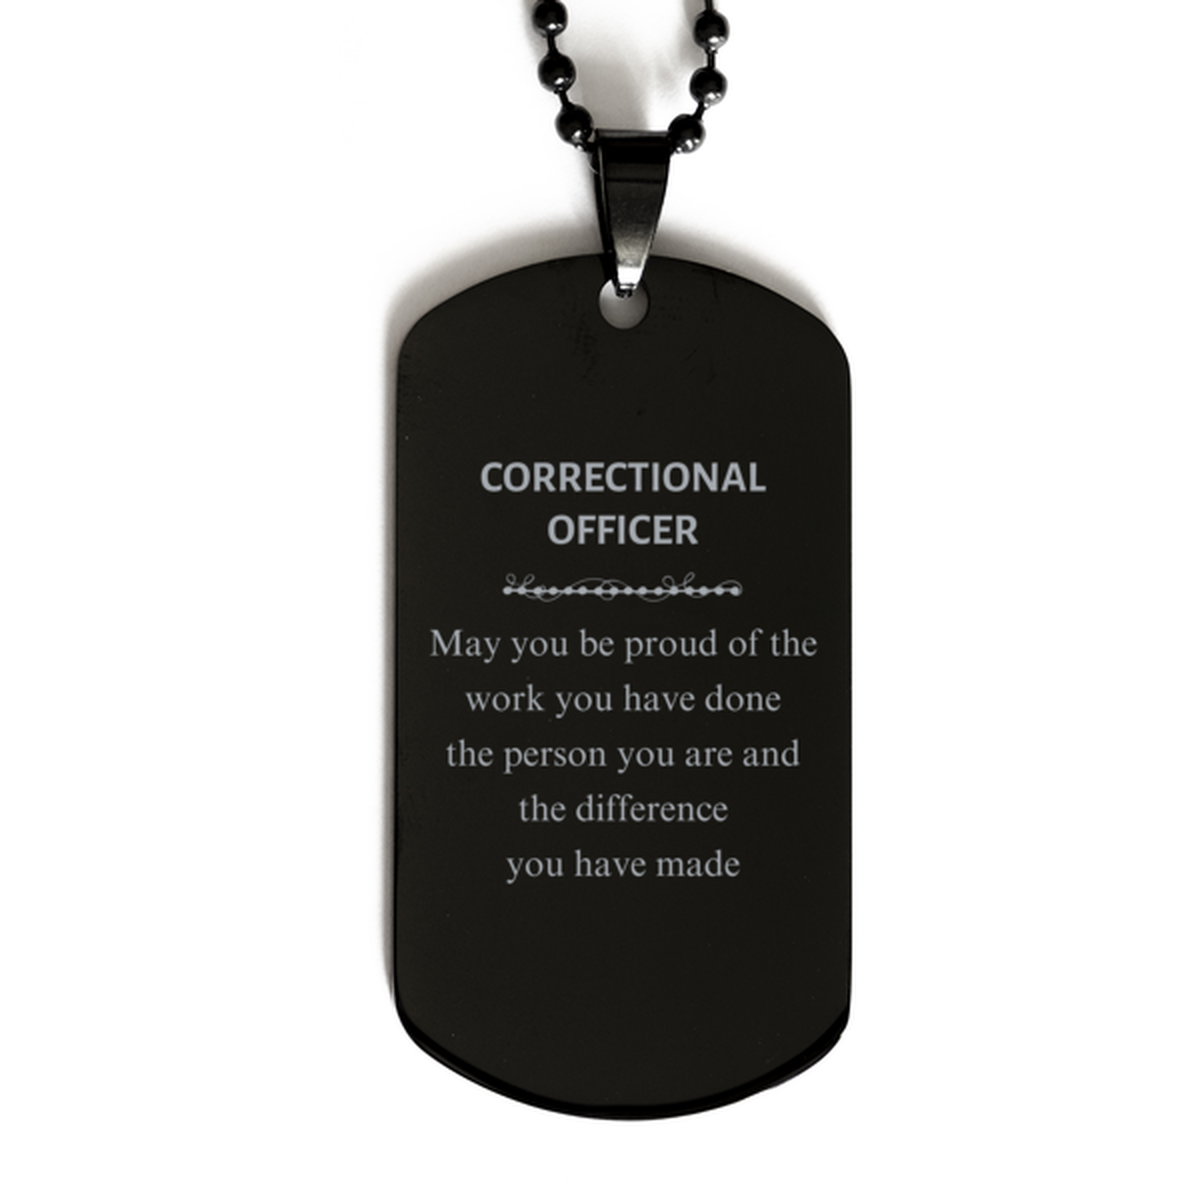 Correctional Officer May you be proud of the work you have done, Retirement Correctional Officer Black Dog Tag for Colleague Appreciation Gifts Amazing for Correctional Officer